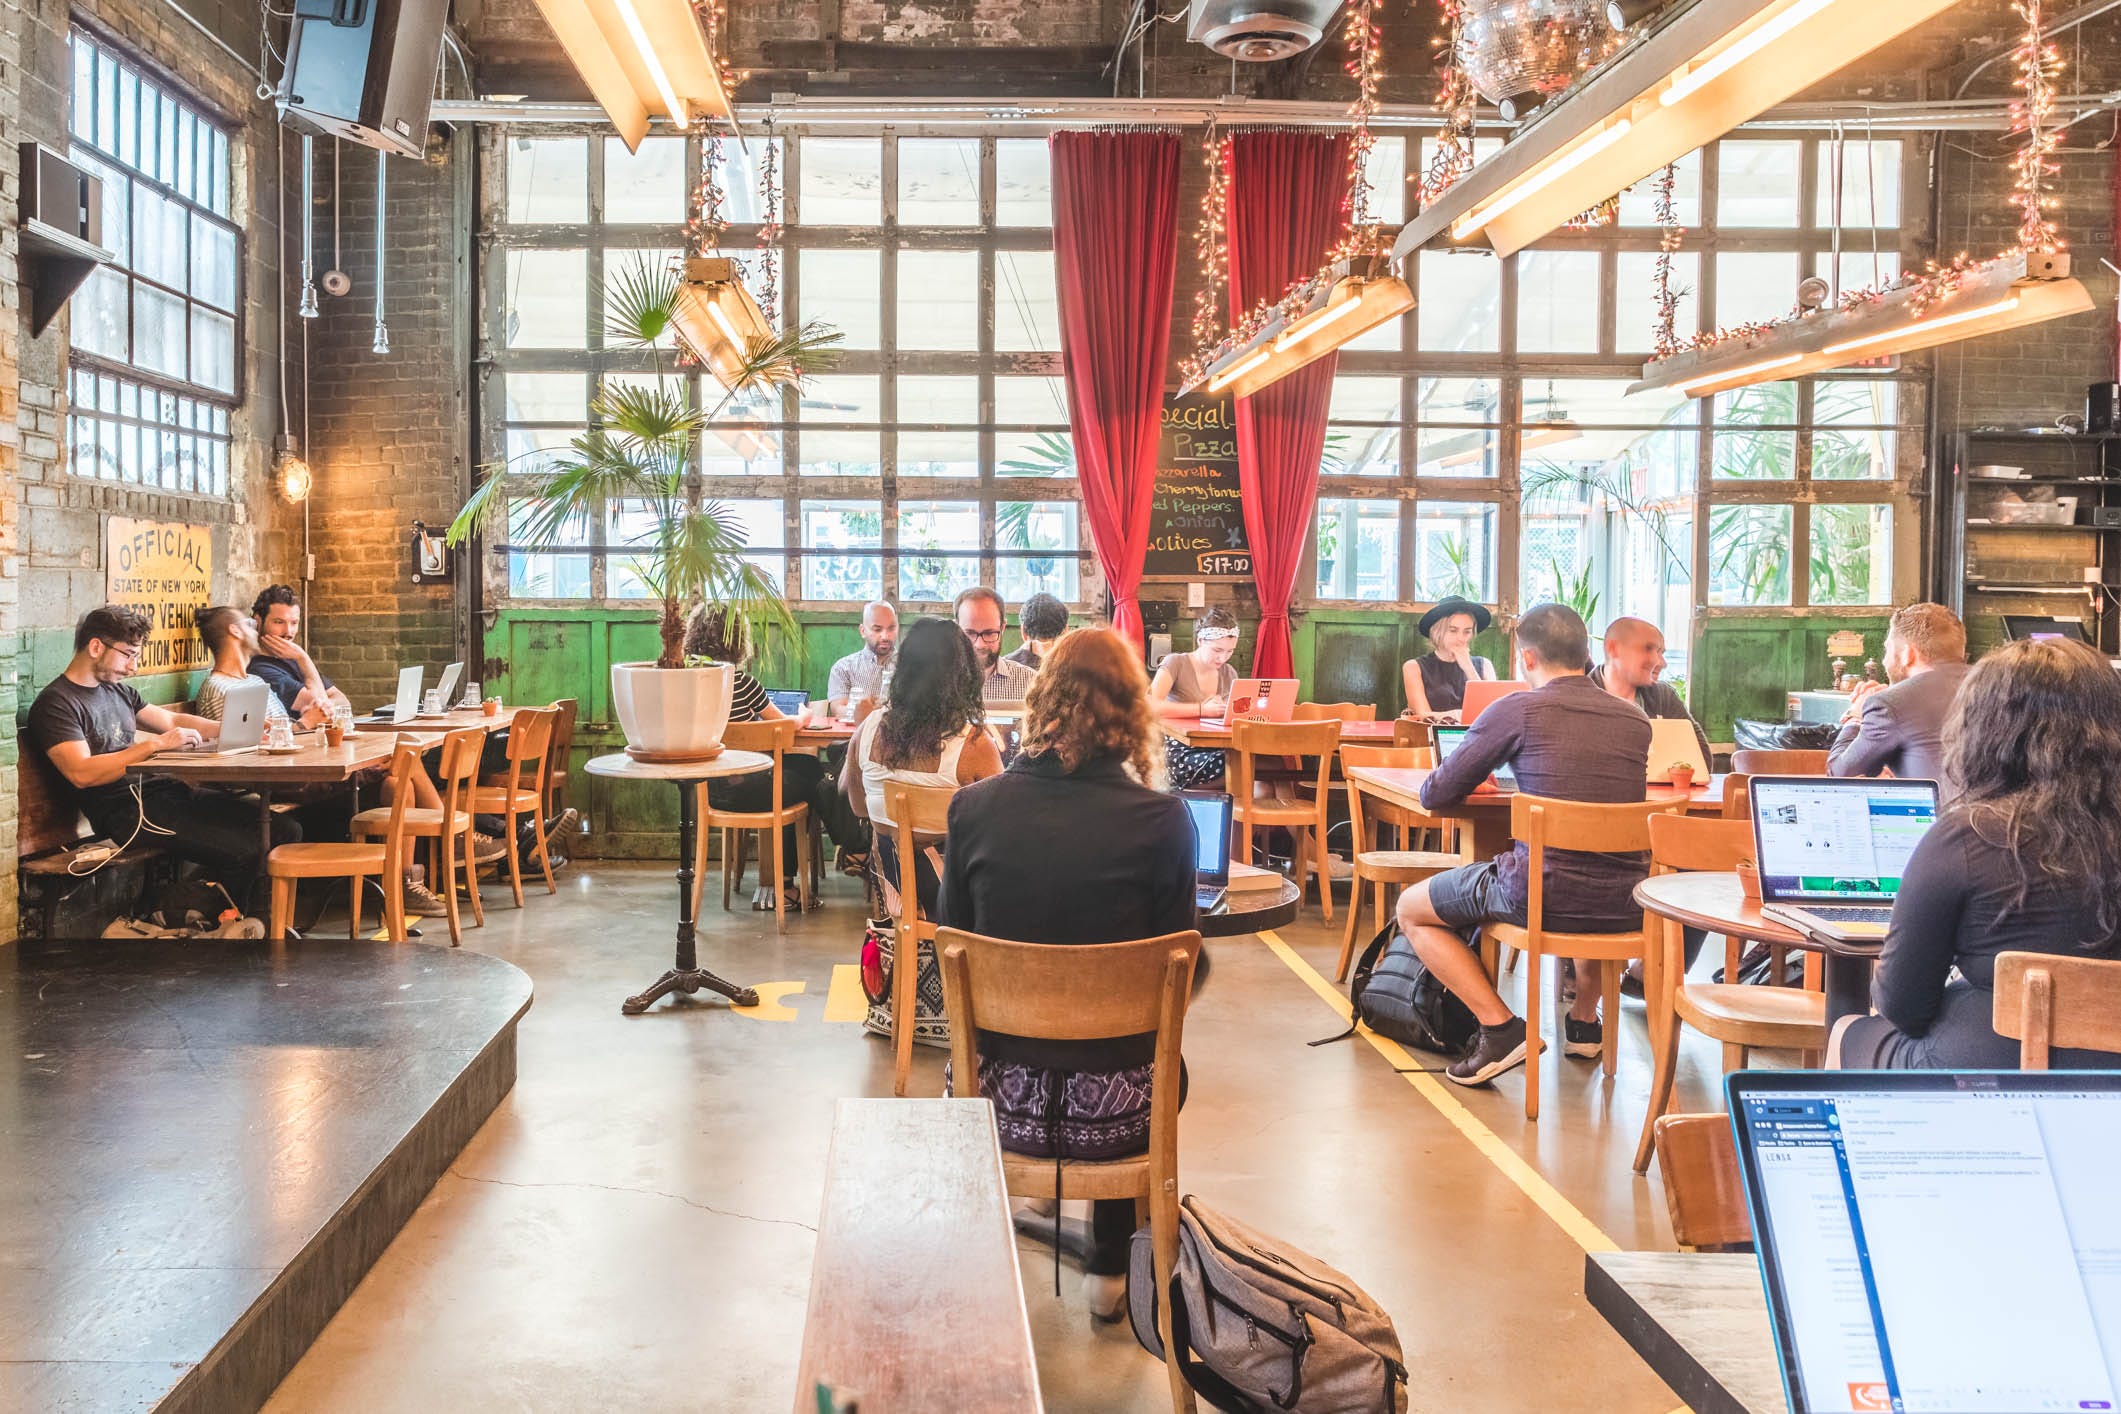 Why coworking in a restaurant is the next cool trend